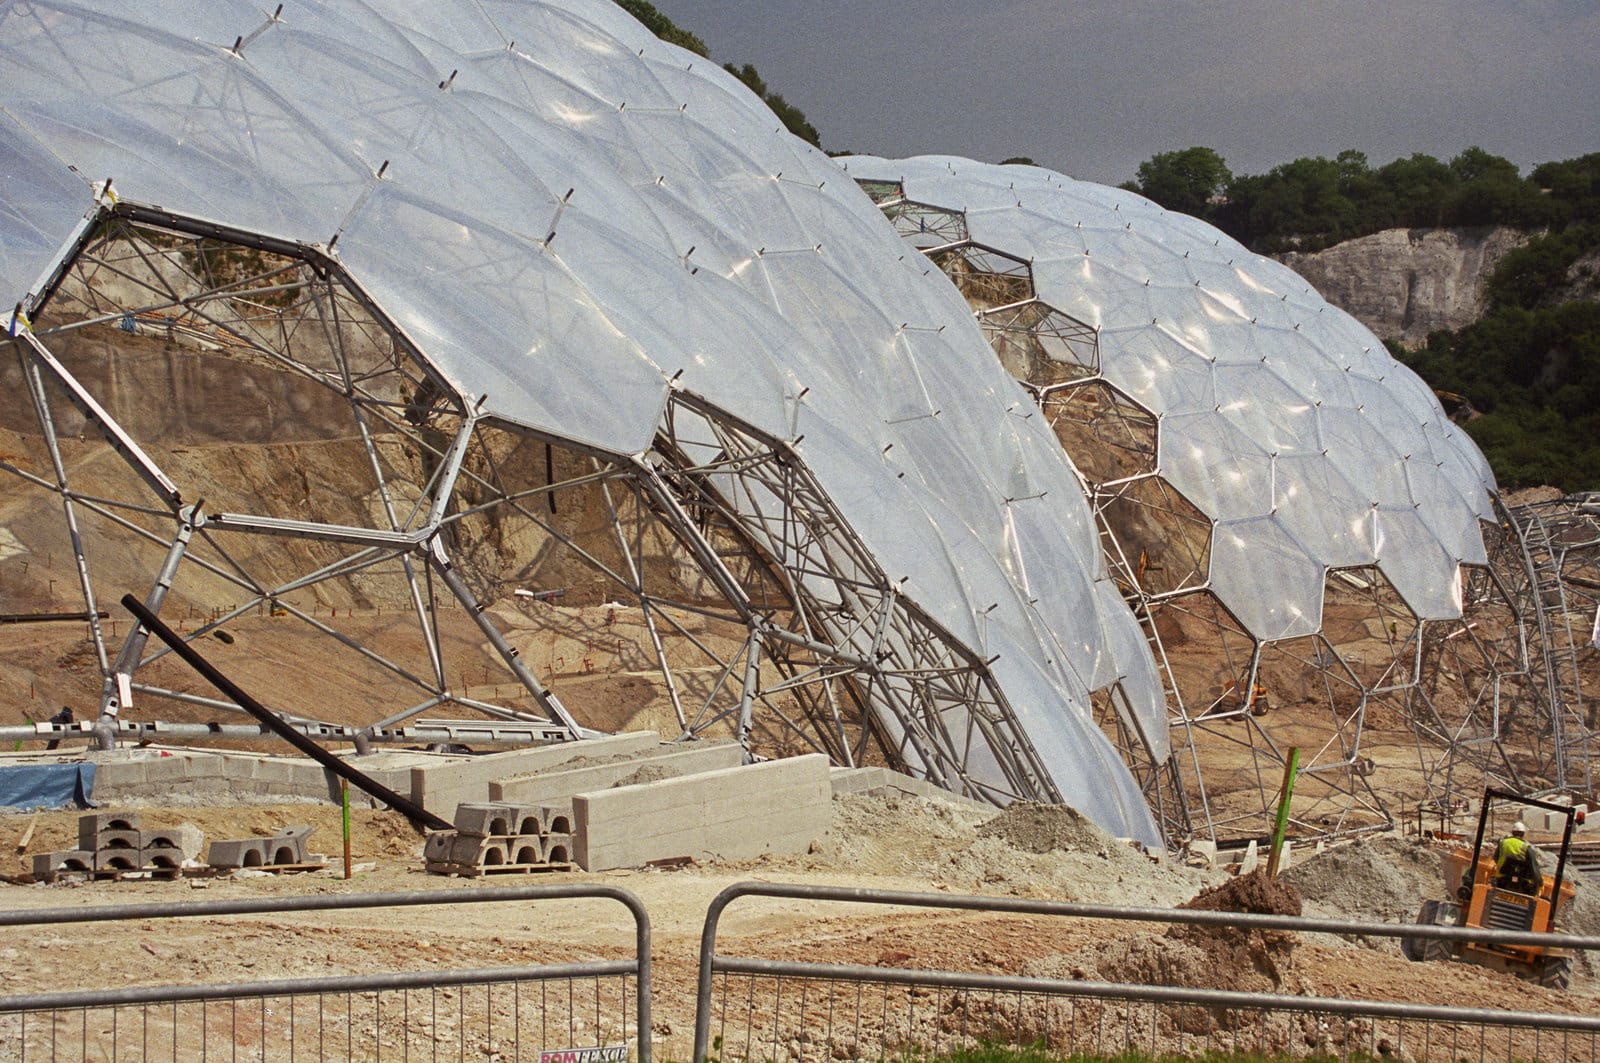 What is The Eden Project and Why is it Being Developed?